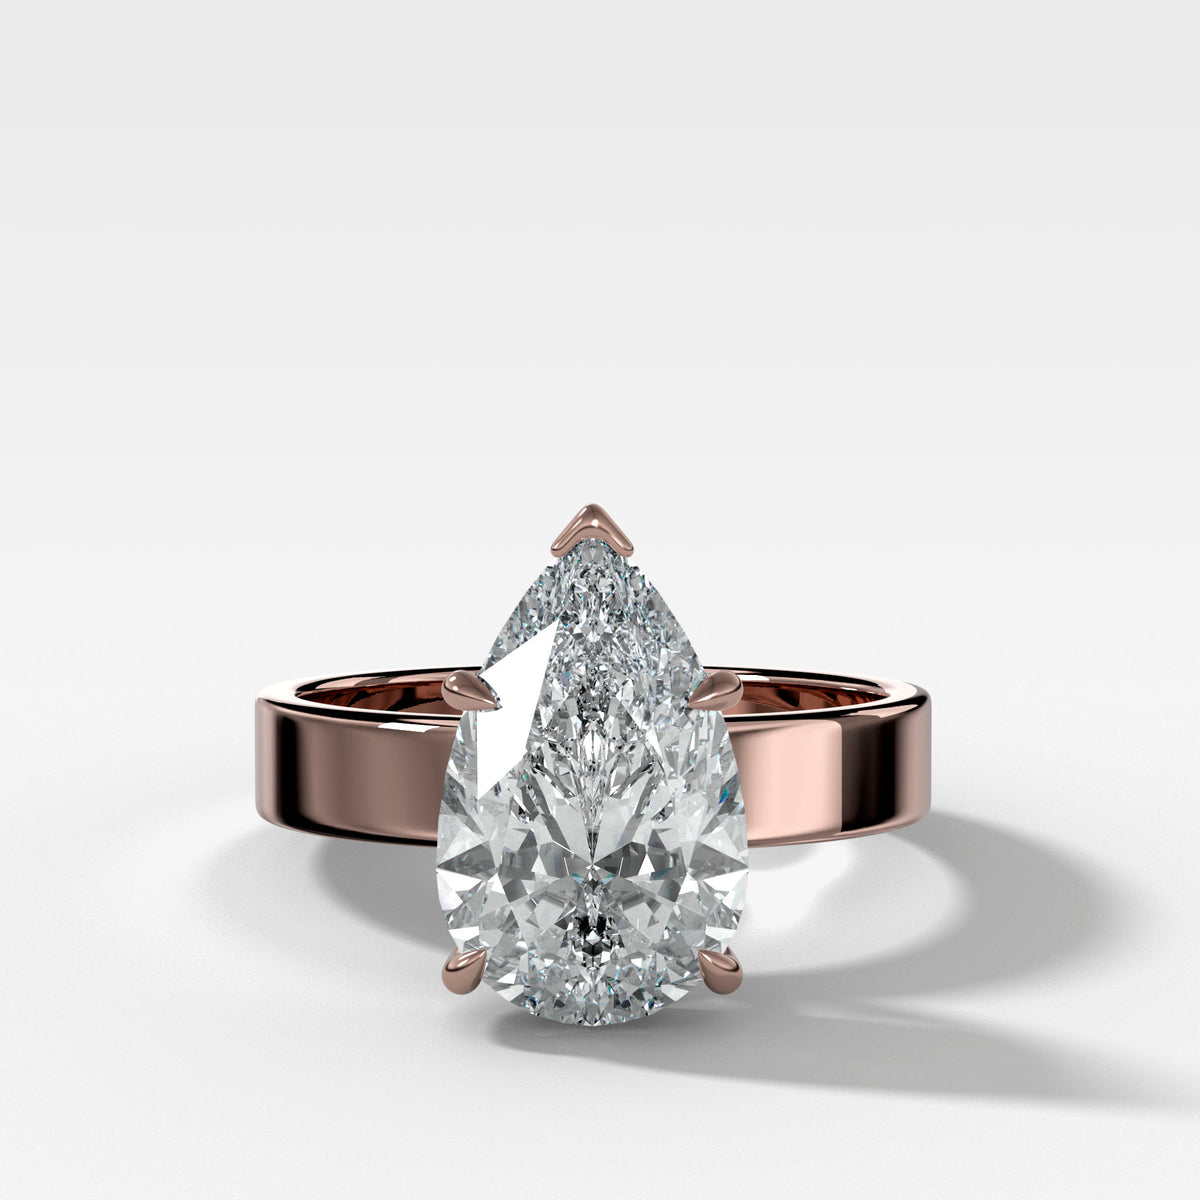 Finest Solitaire Engagement Ring With Pear Cut Diamond